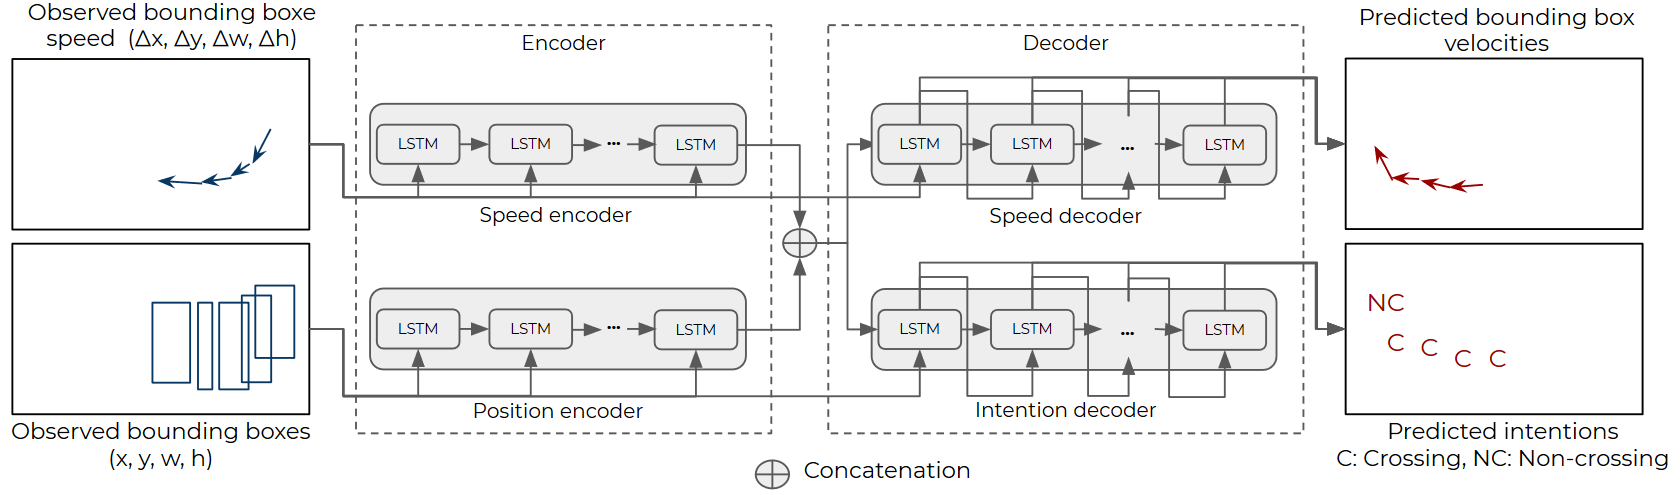 Our proposed multitask Position-Speed-LSTM (PV-LSTM) architecture